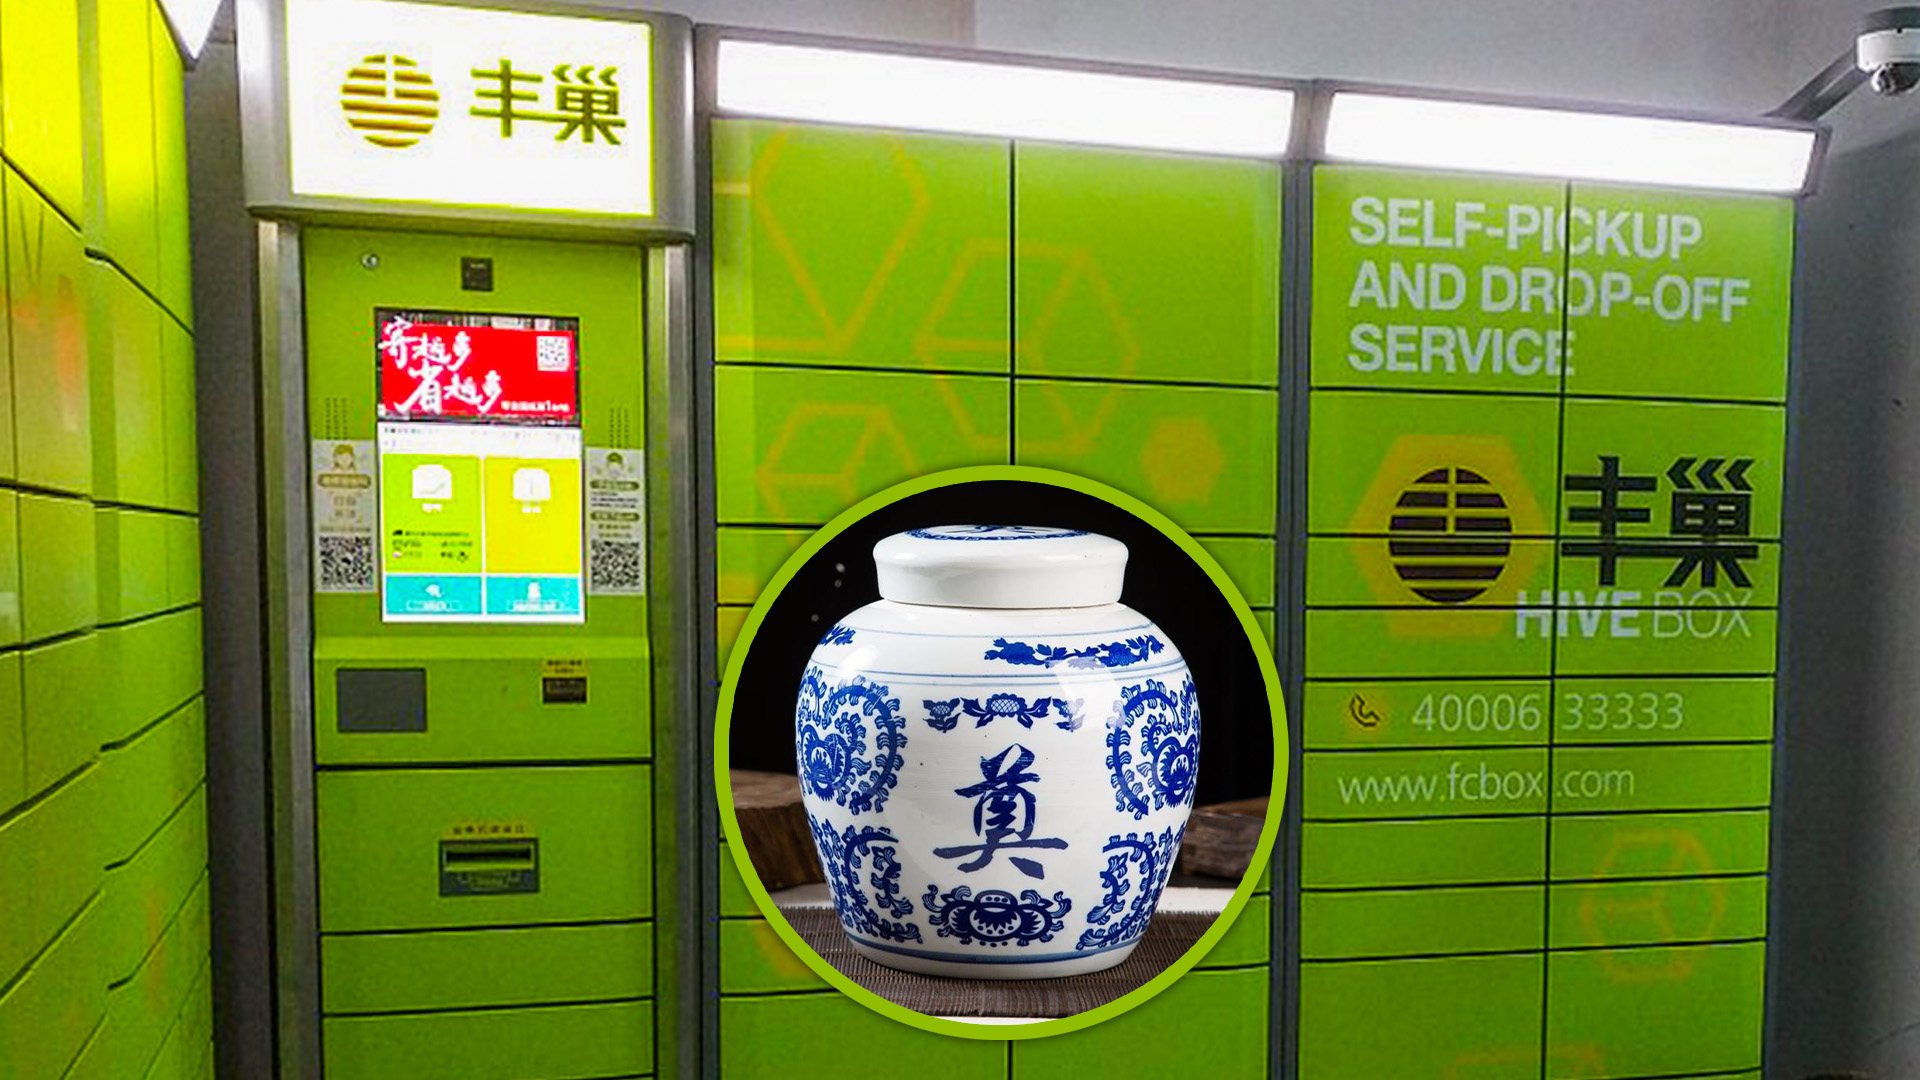 A wave of anger has hit social media in China after a woman told her friend to put his father’s ashes in a cheap parcel locker to save money. Photo: SCMP composite/Taobao/Wikipedia